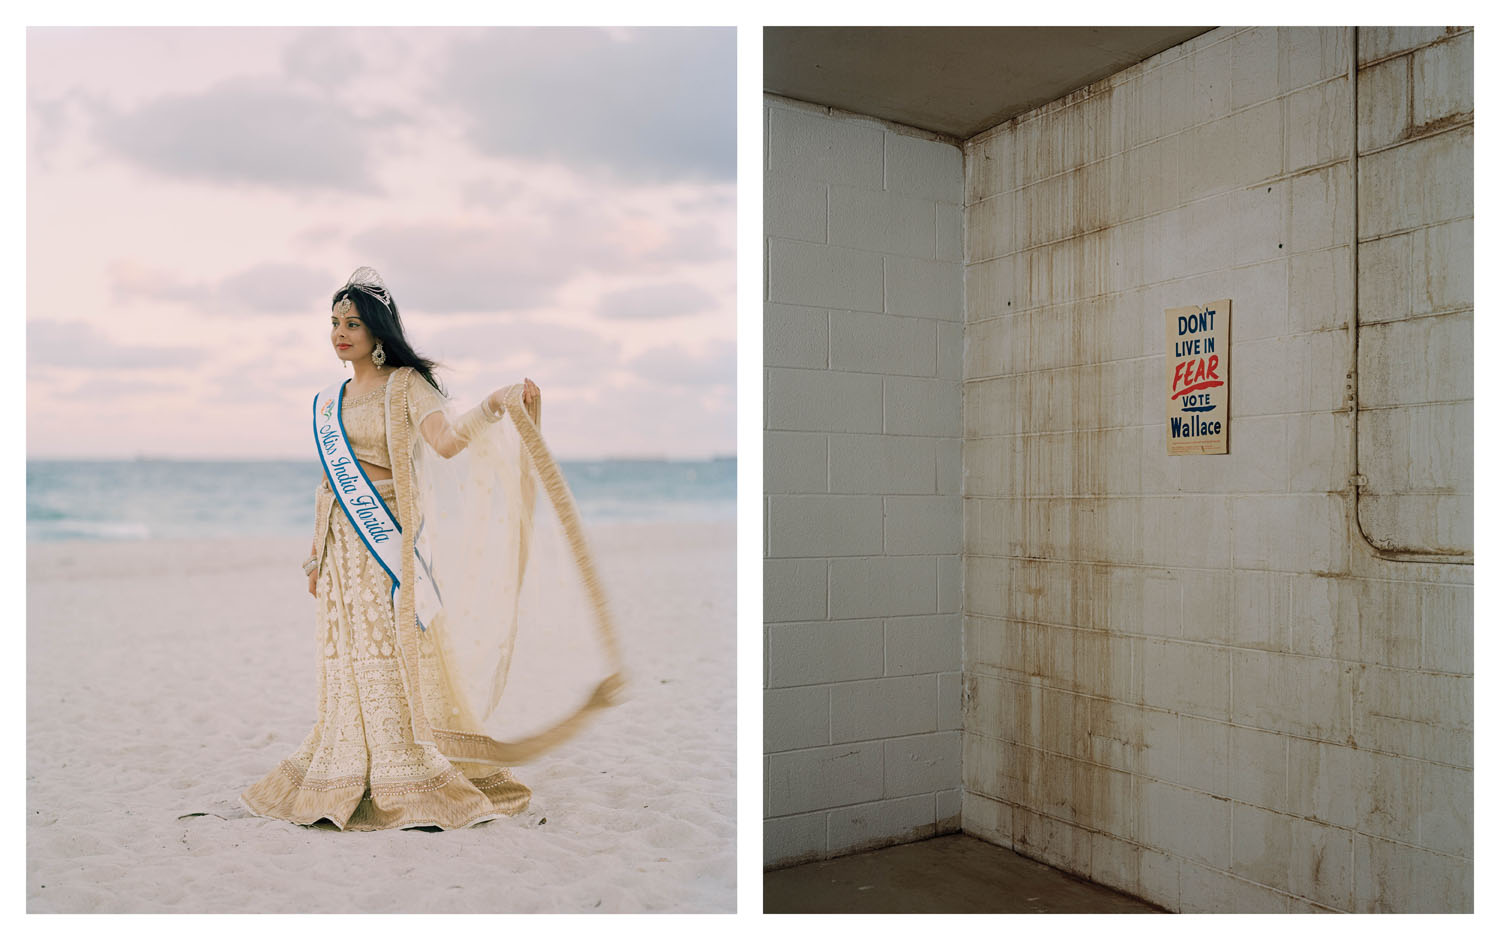 LEFT: Miss India Florida 2015, Ritika Singh. RIGHT: A poster from George Wallace’s 1968 presidential campaign. Photograph by Ben Rasmussen.